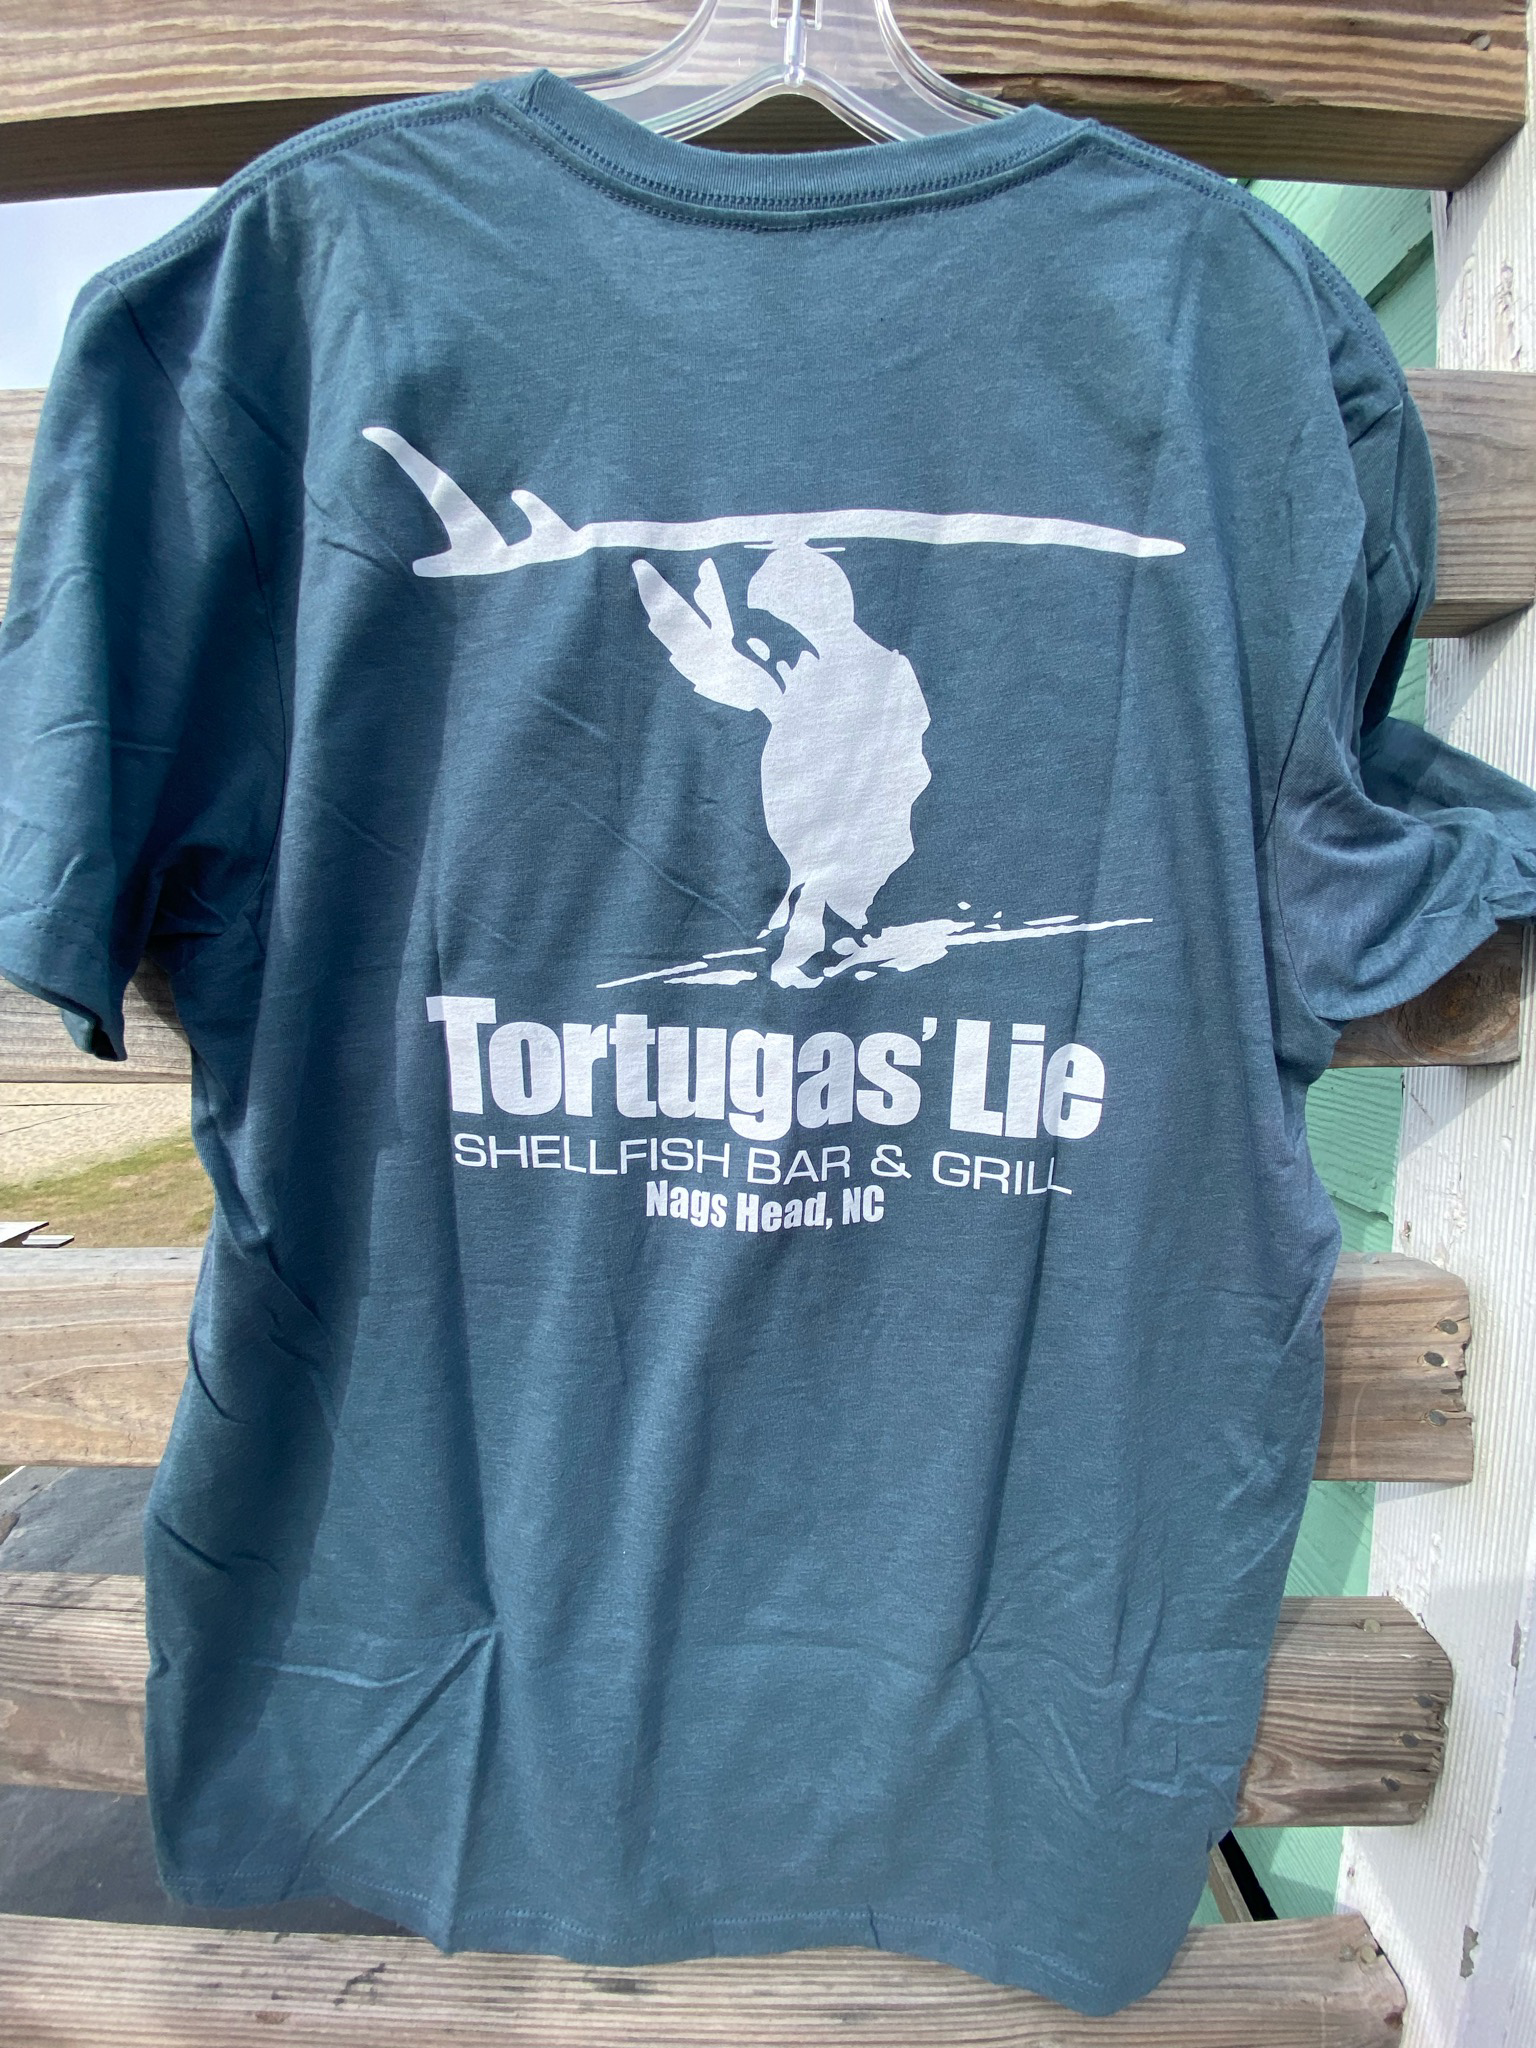 Tortuga's Lie Store - Buy tshirts, sauces, seasonings, and other 